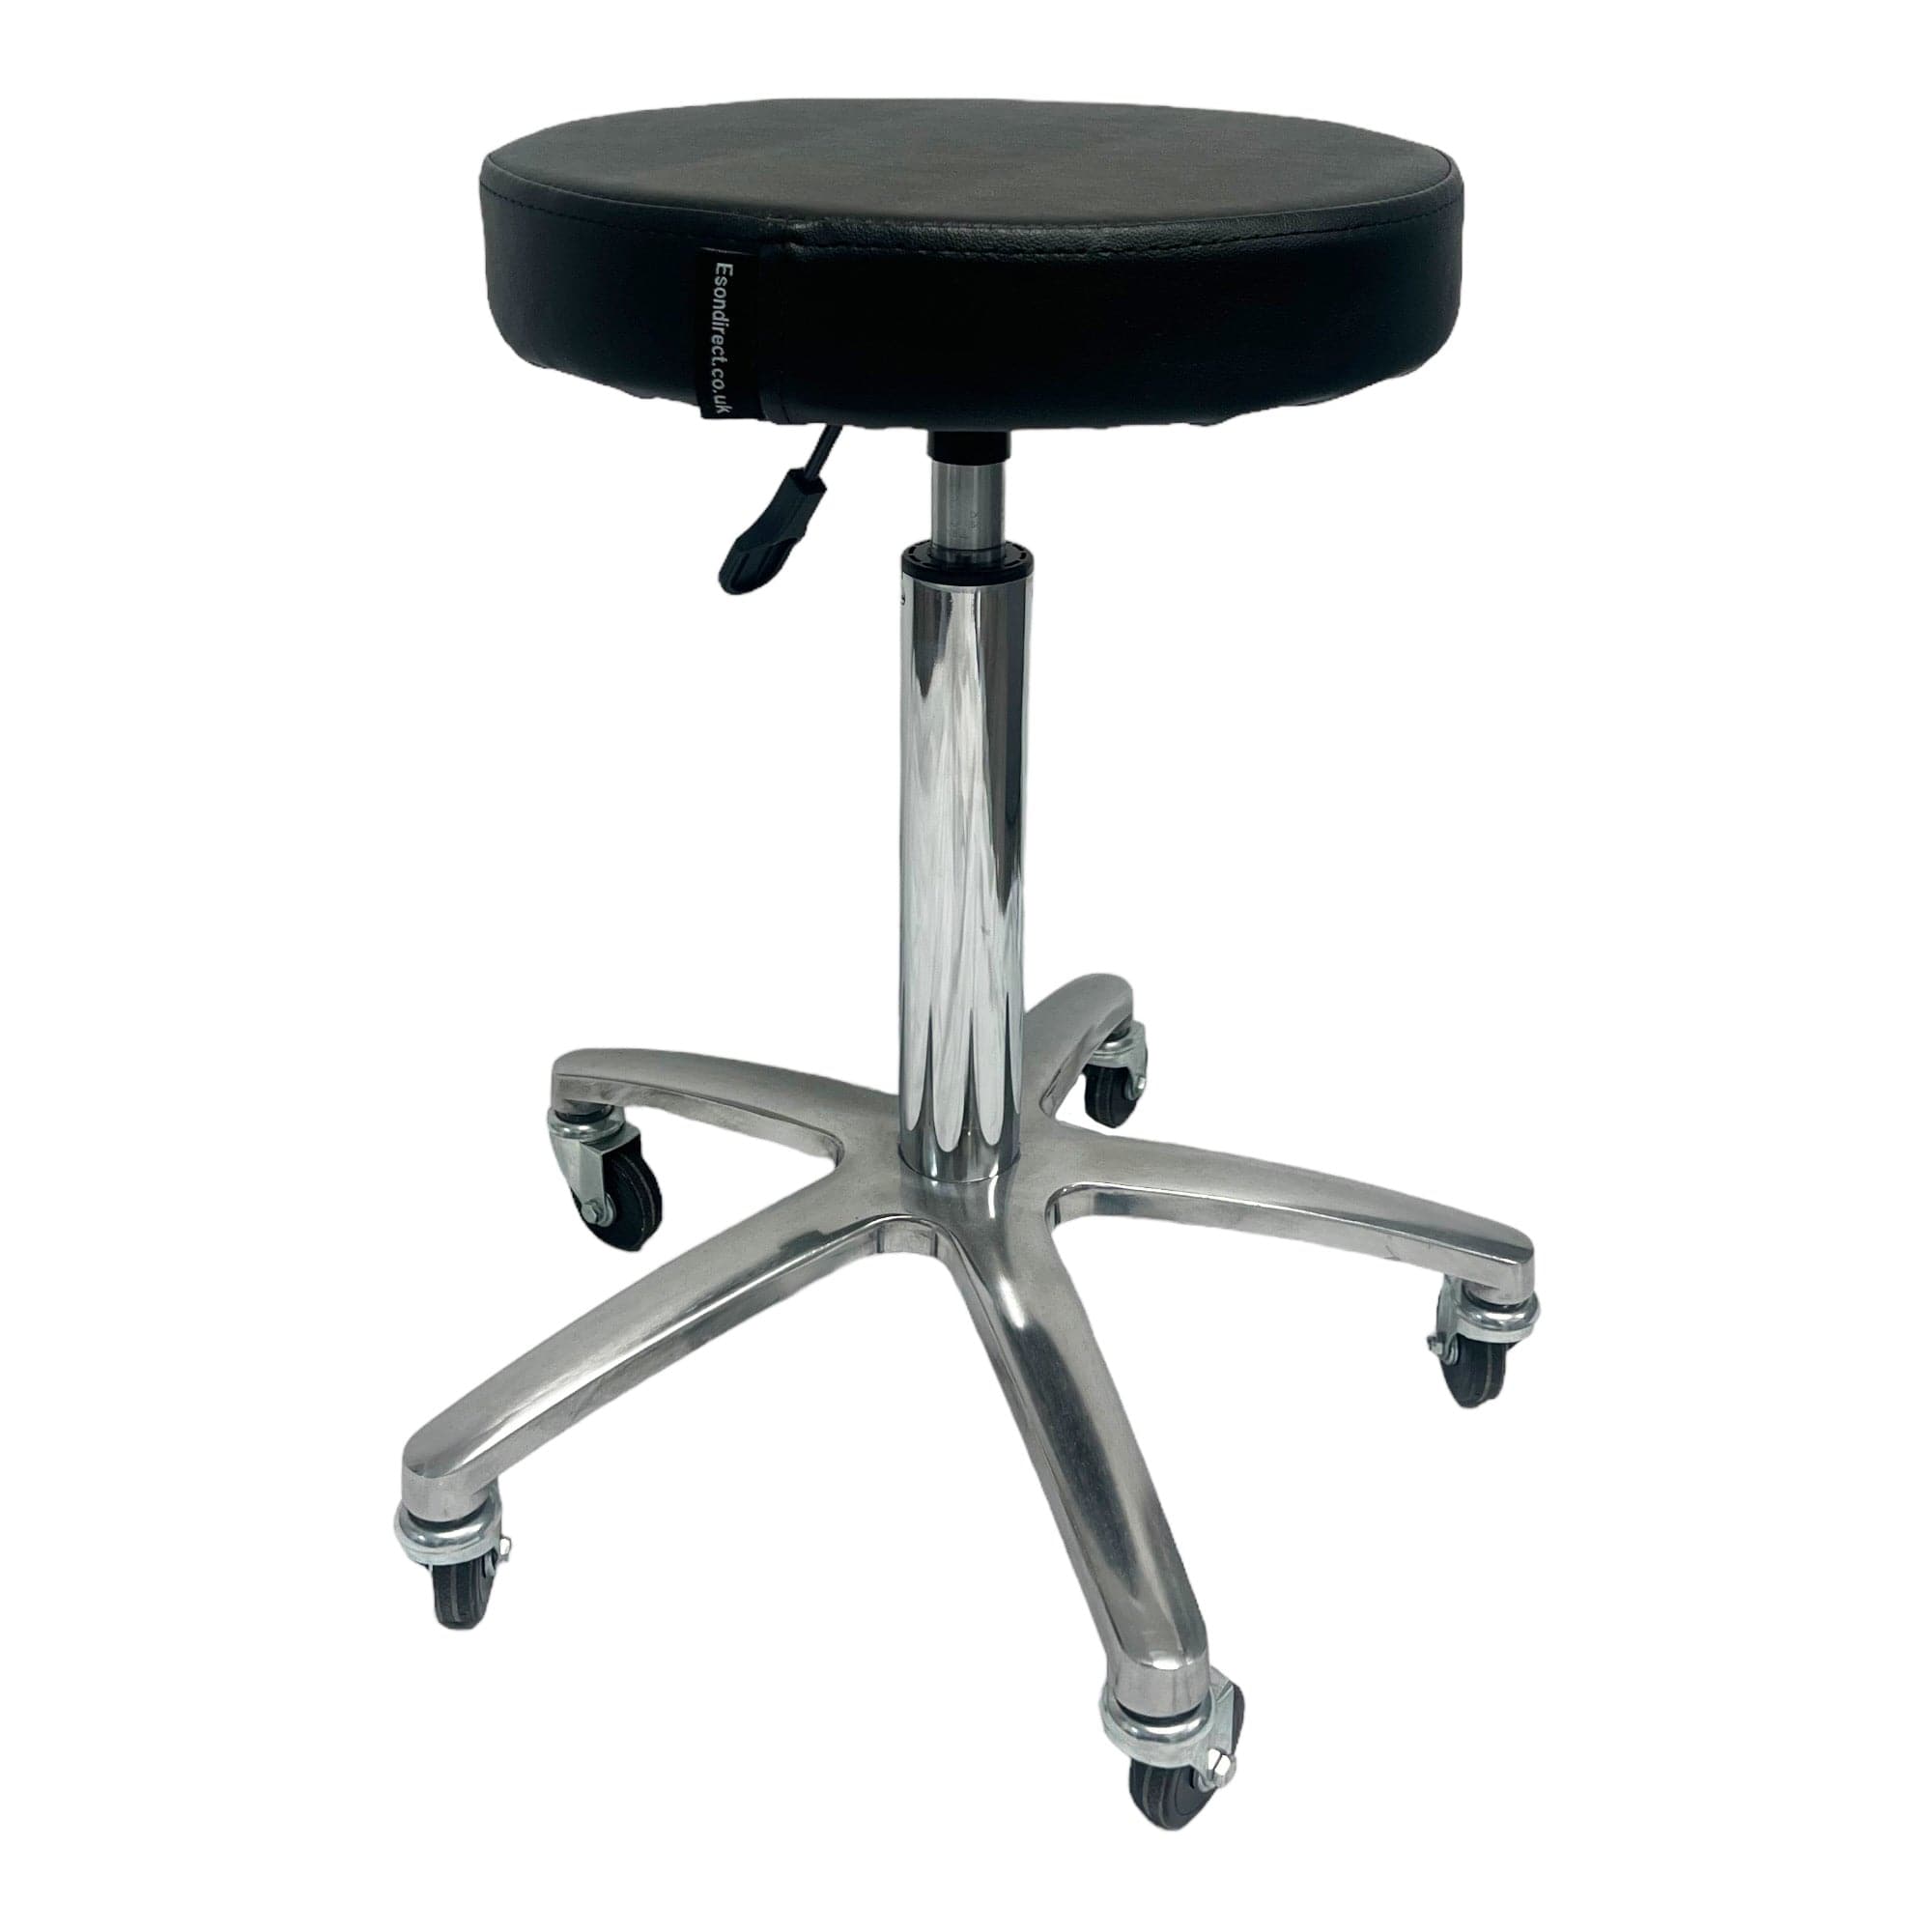 Eson - Classic Round Stool Chair Adjustable Height & Swivel